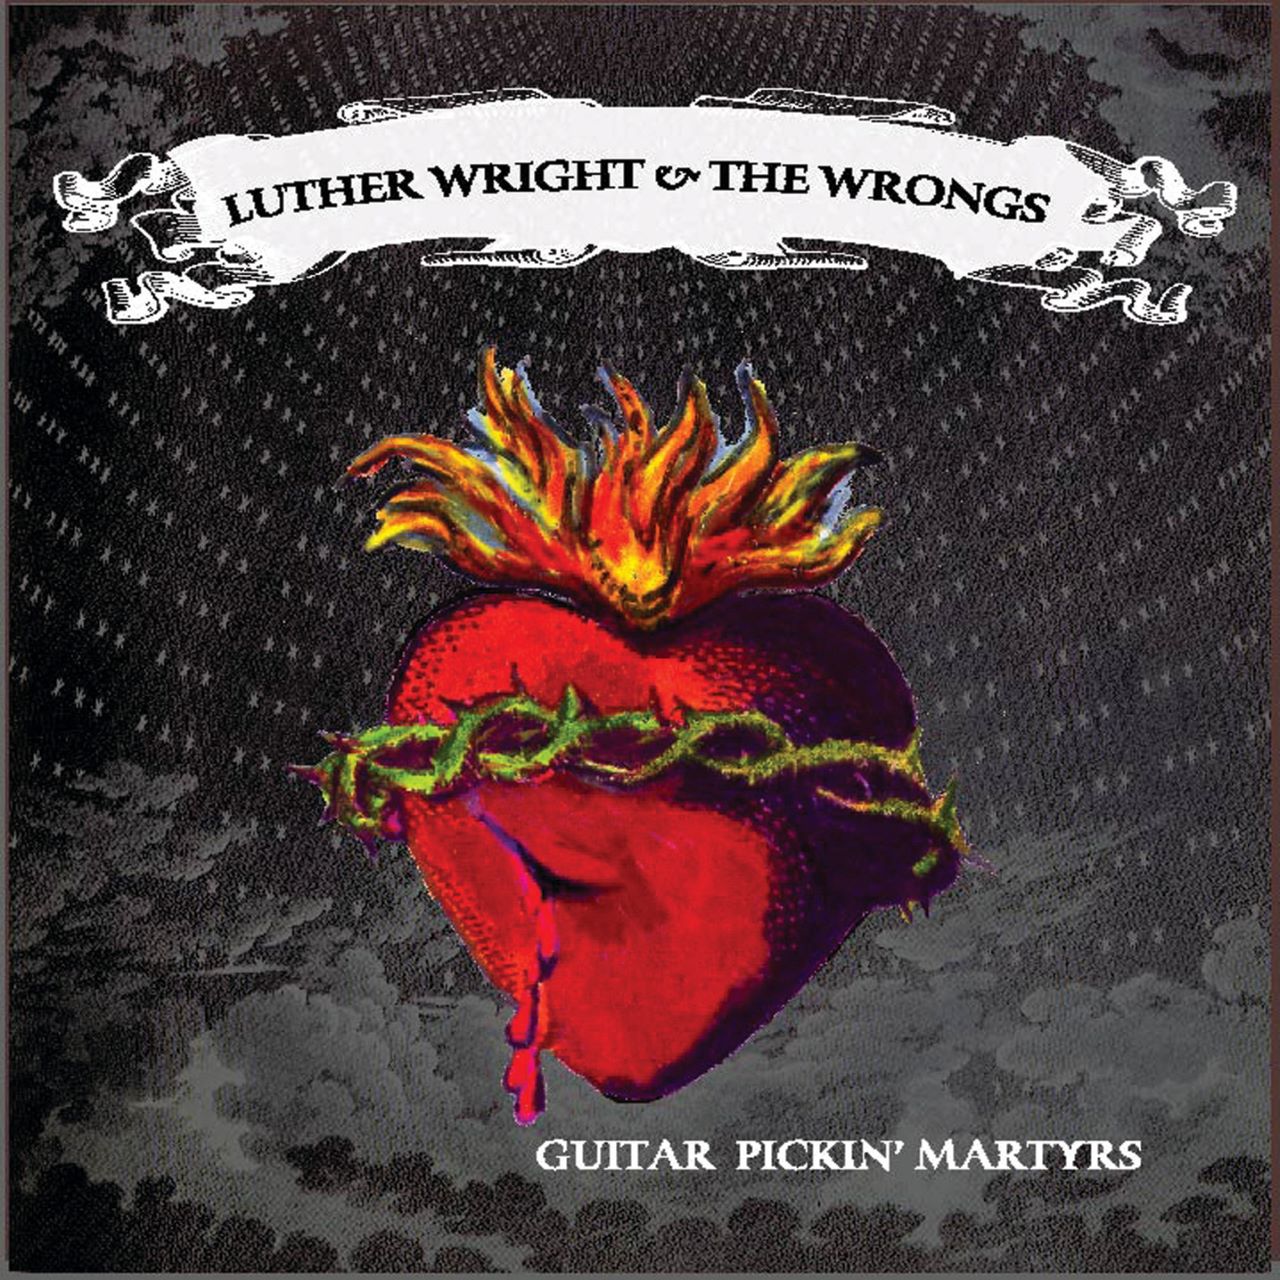 Luther Wright & The Wrongs - Guitar Pickin’ Martyrs cover album